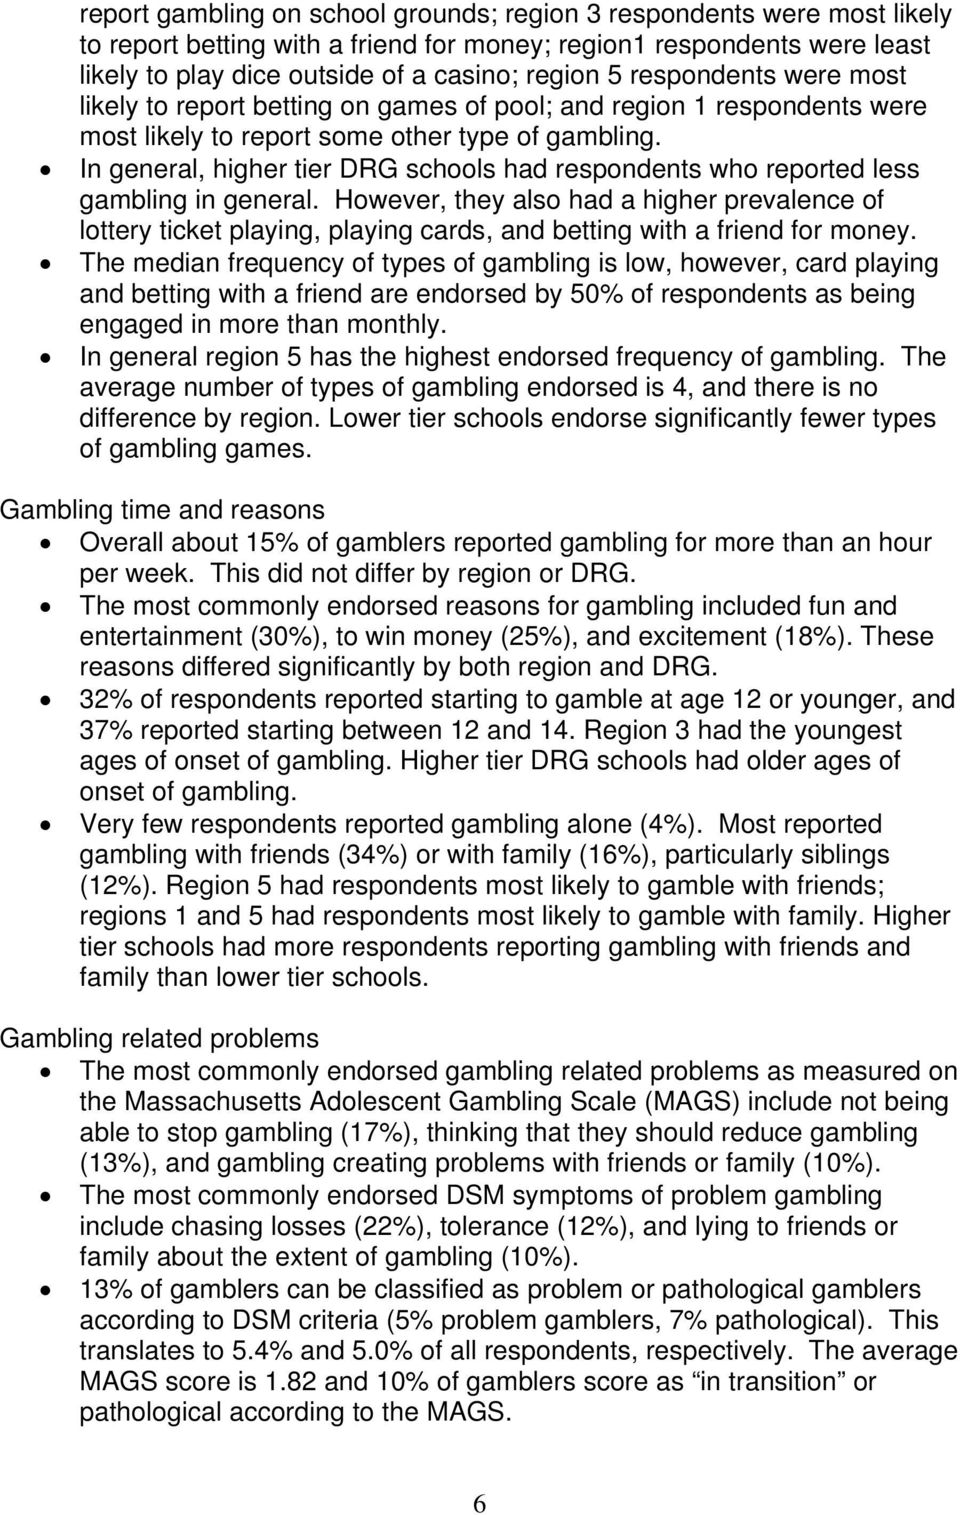 In general, higher tier DRG schools had respondents who reported less gambling in general.